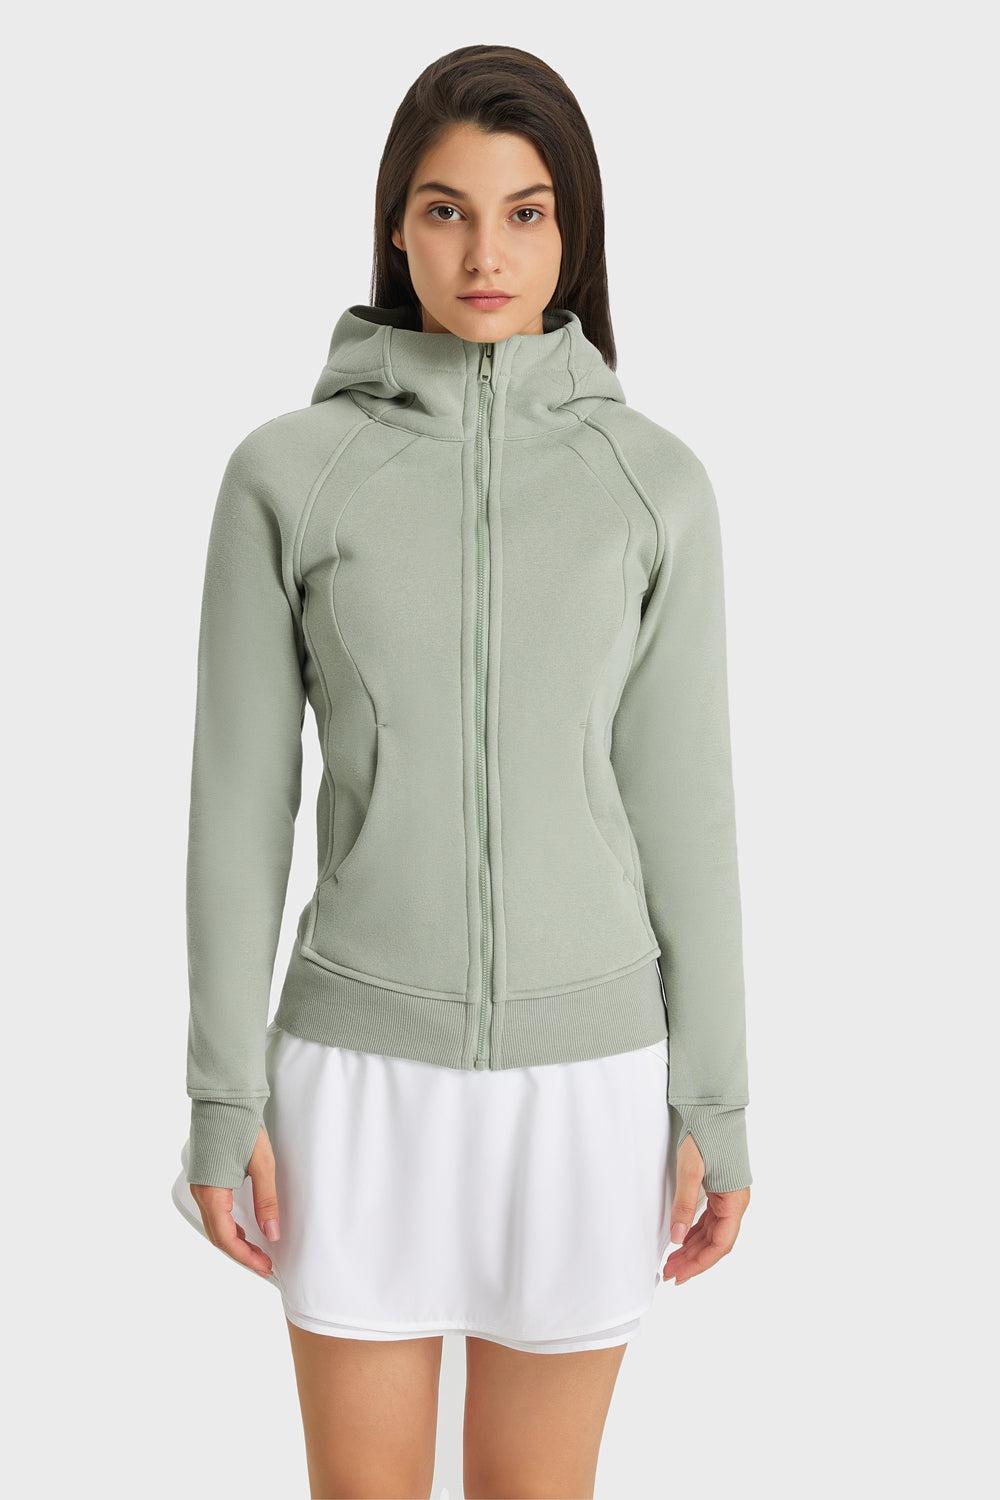 Zip Up Seam Detail Hooded Sports Jacket-TOPS / DRESSES-[Adult]-[Female]-Green-4-Blue Zone Planet